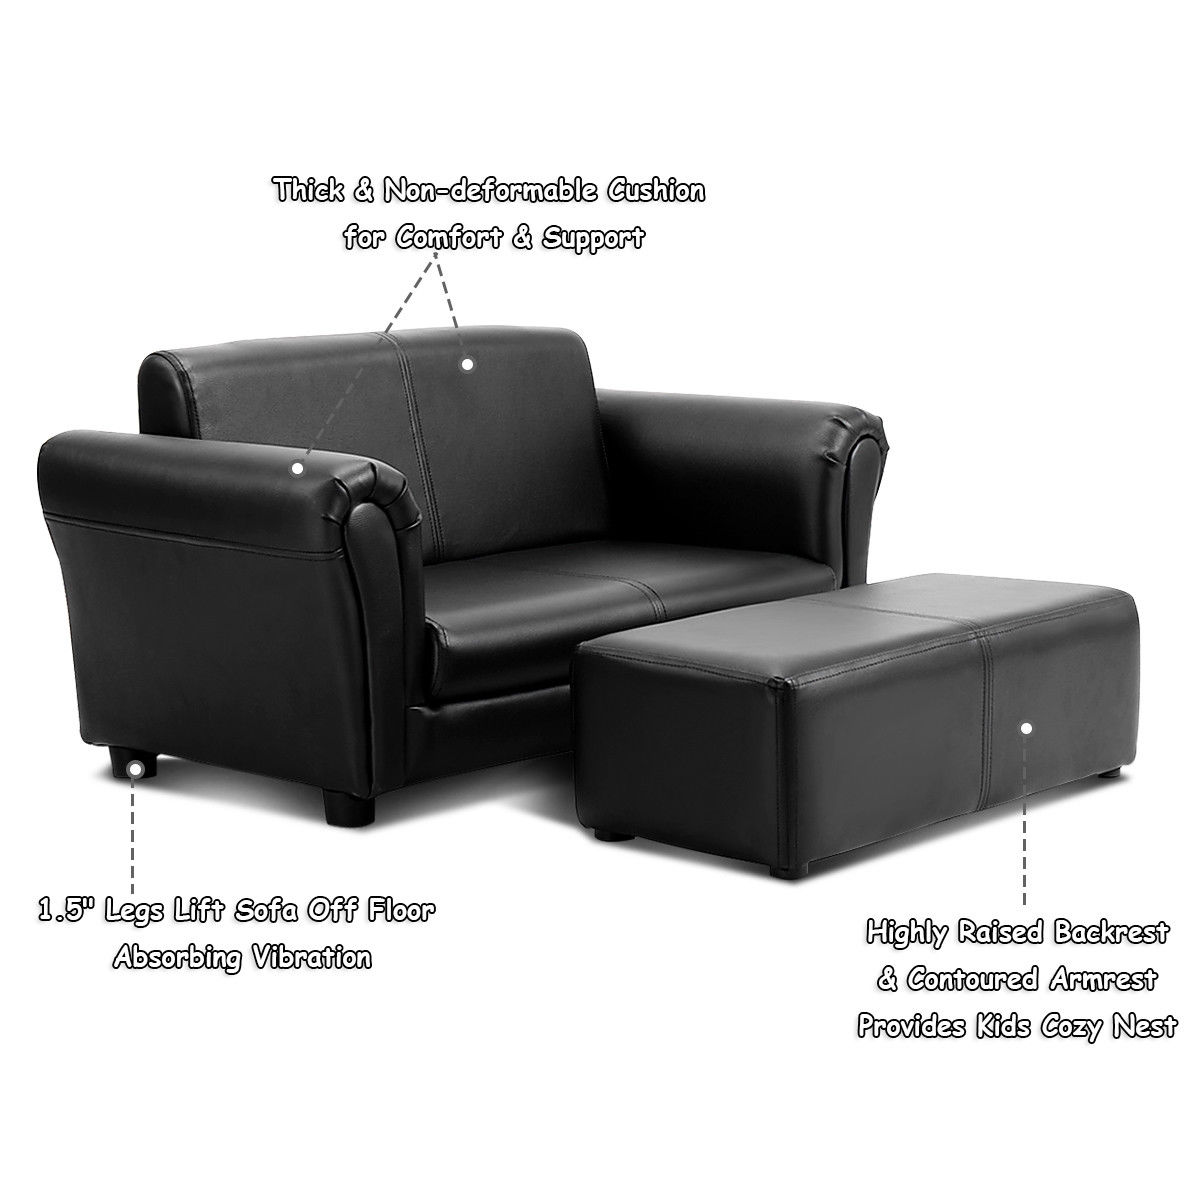 Costway Kids Sofa Armrest Chair Couch Lounge in Black